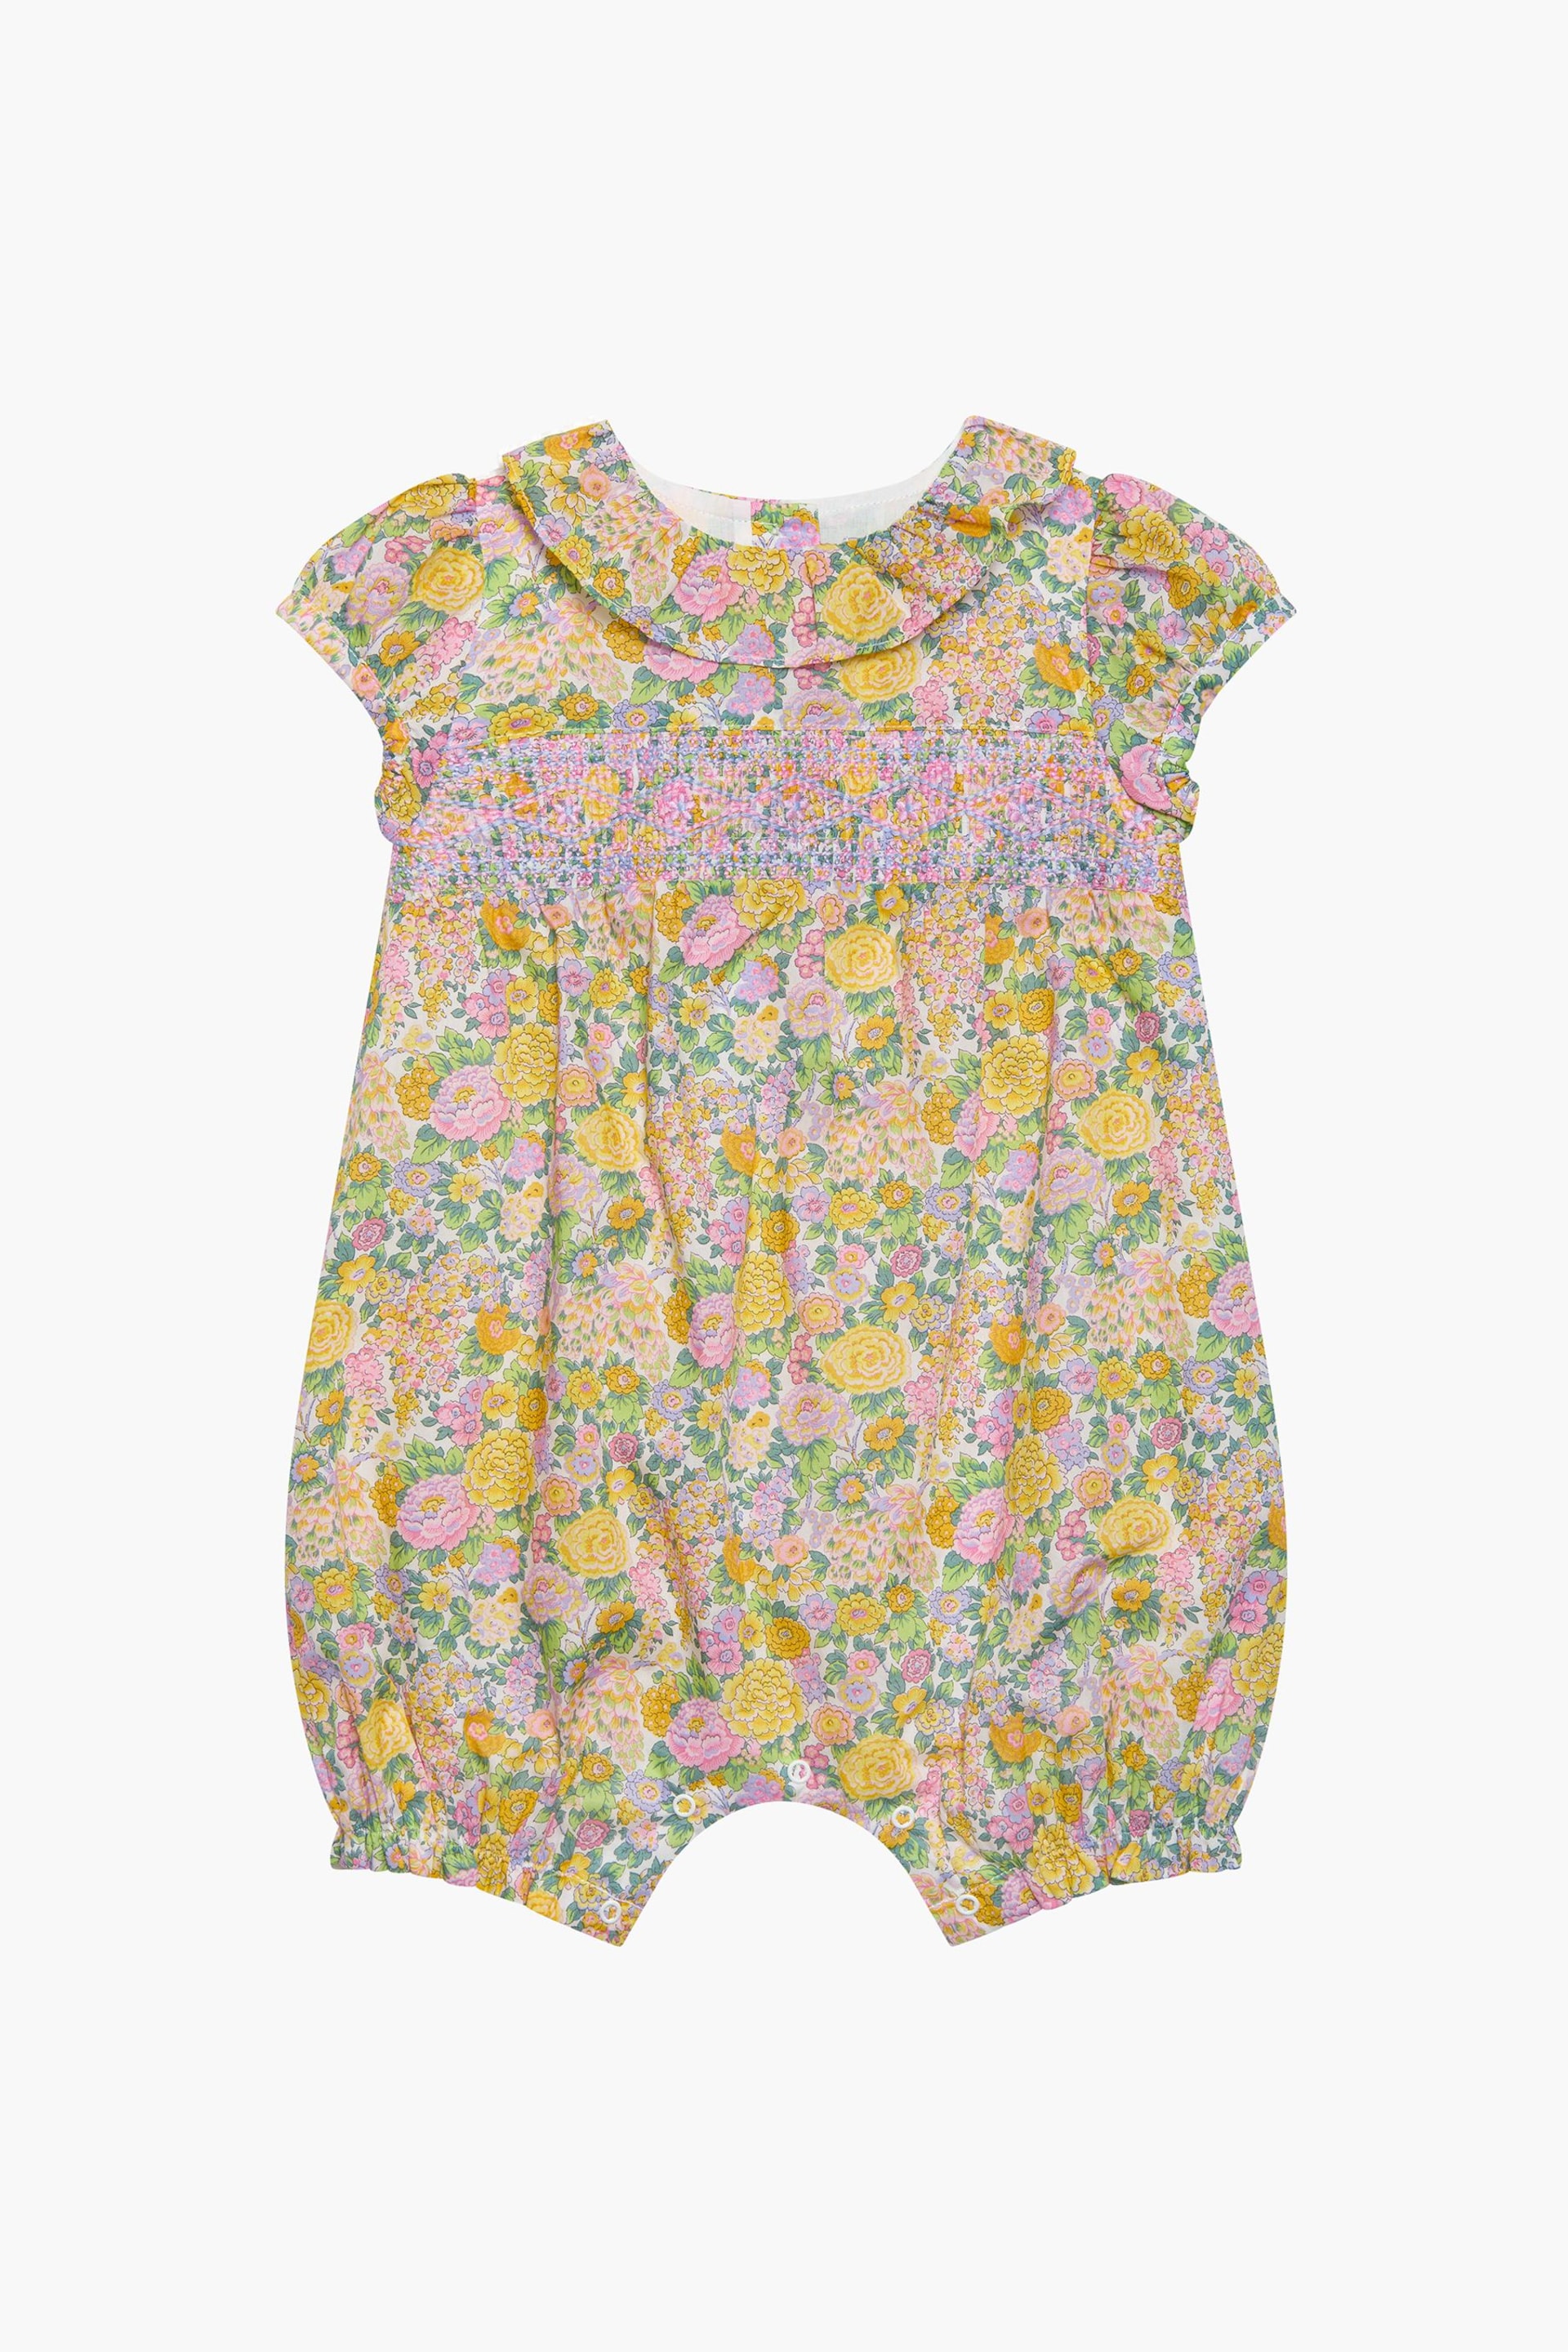 Trotters London Yellow Little Liberty Print Lemon Elysian Day Smocked Cotton Willow Romper - Image 1 of 3